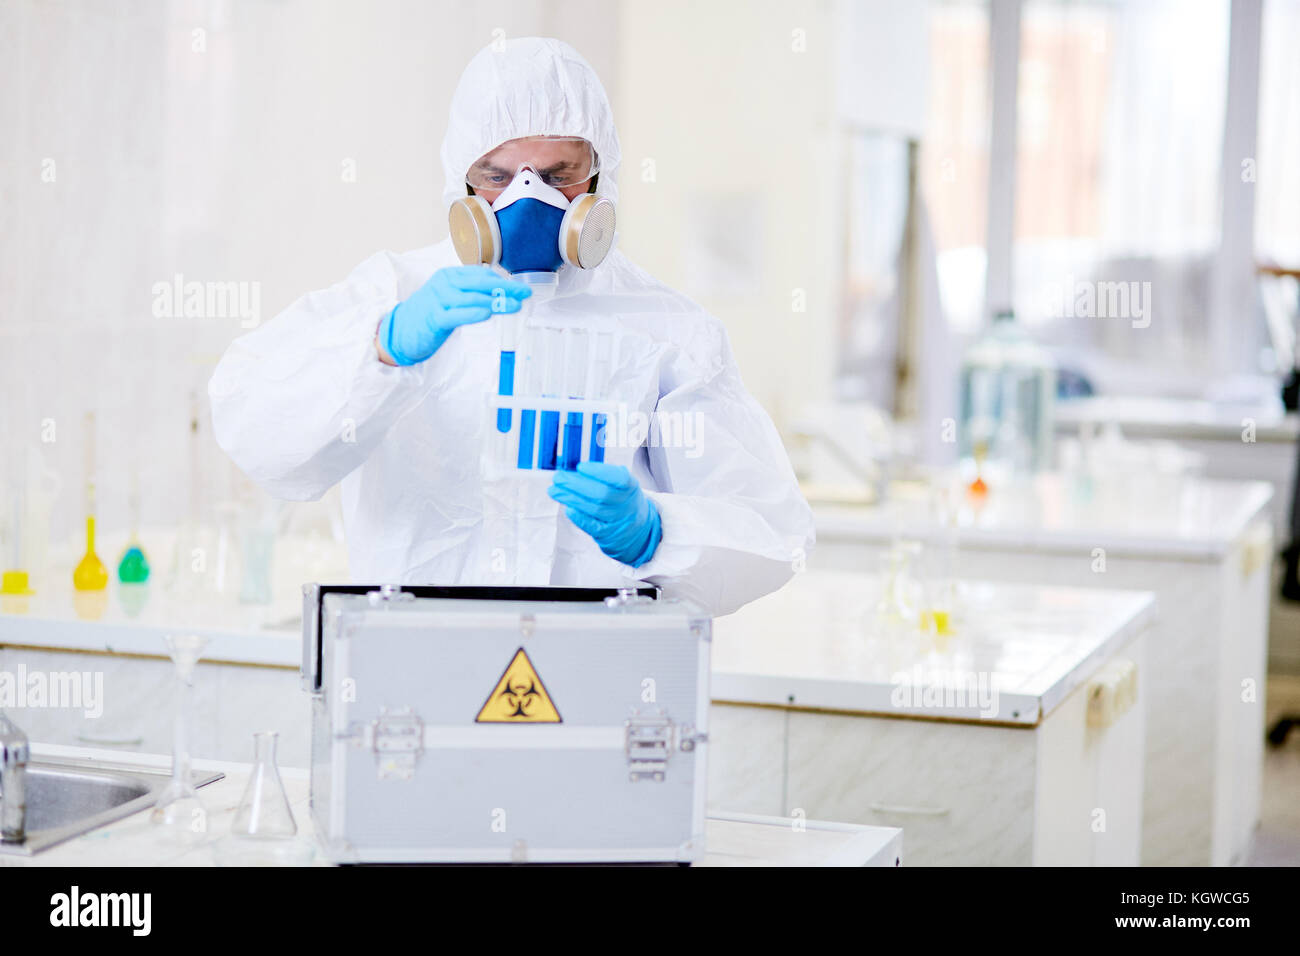 Man in coverall, gloves and respirator working with toxic liquids Stock Photo